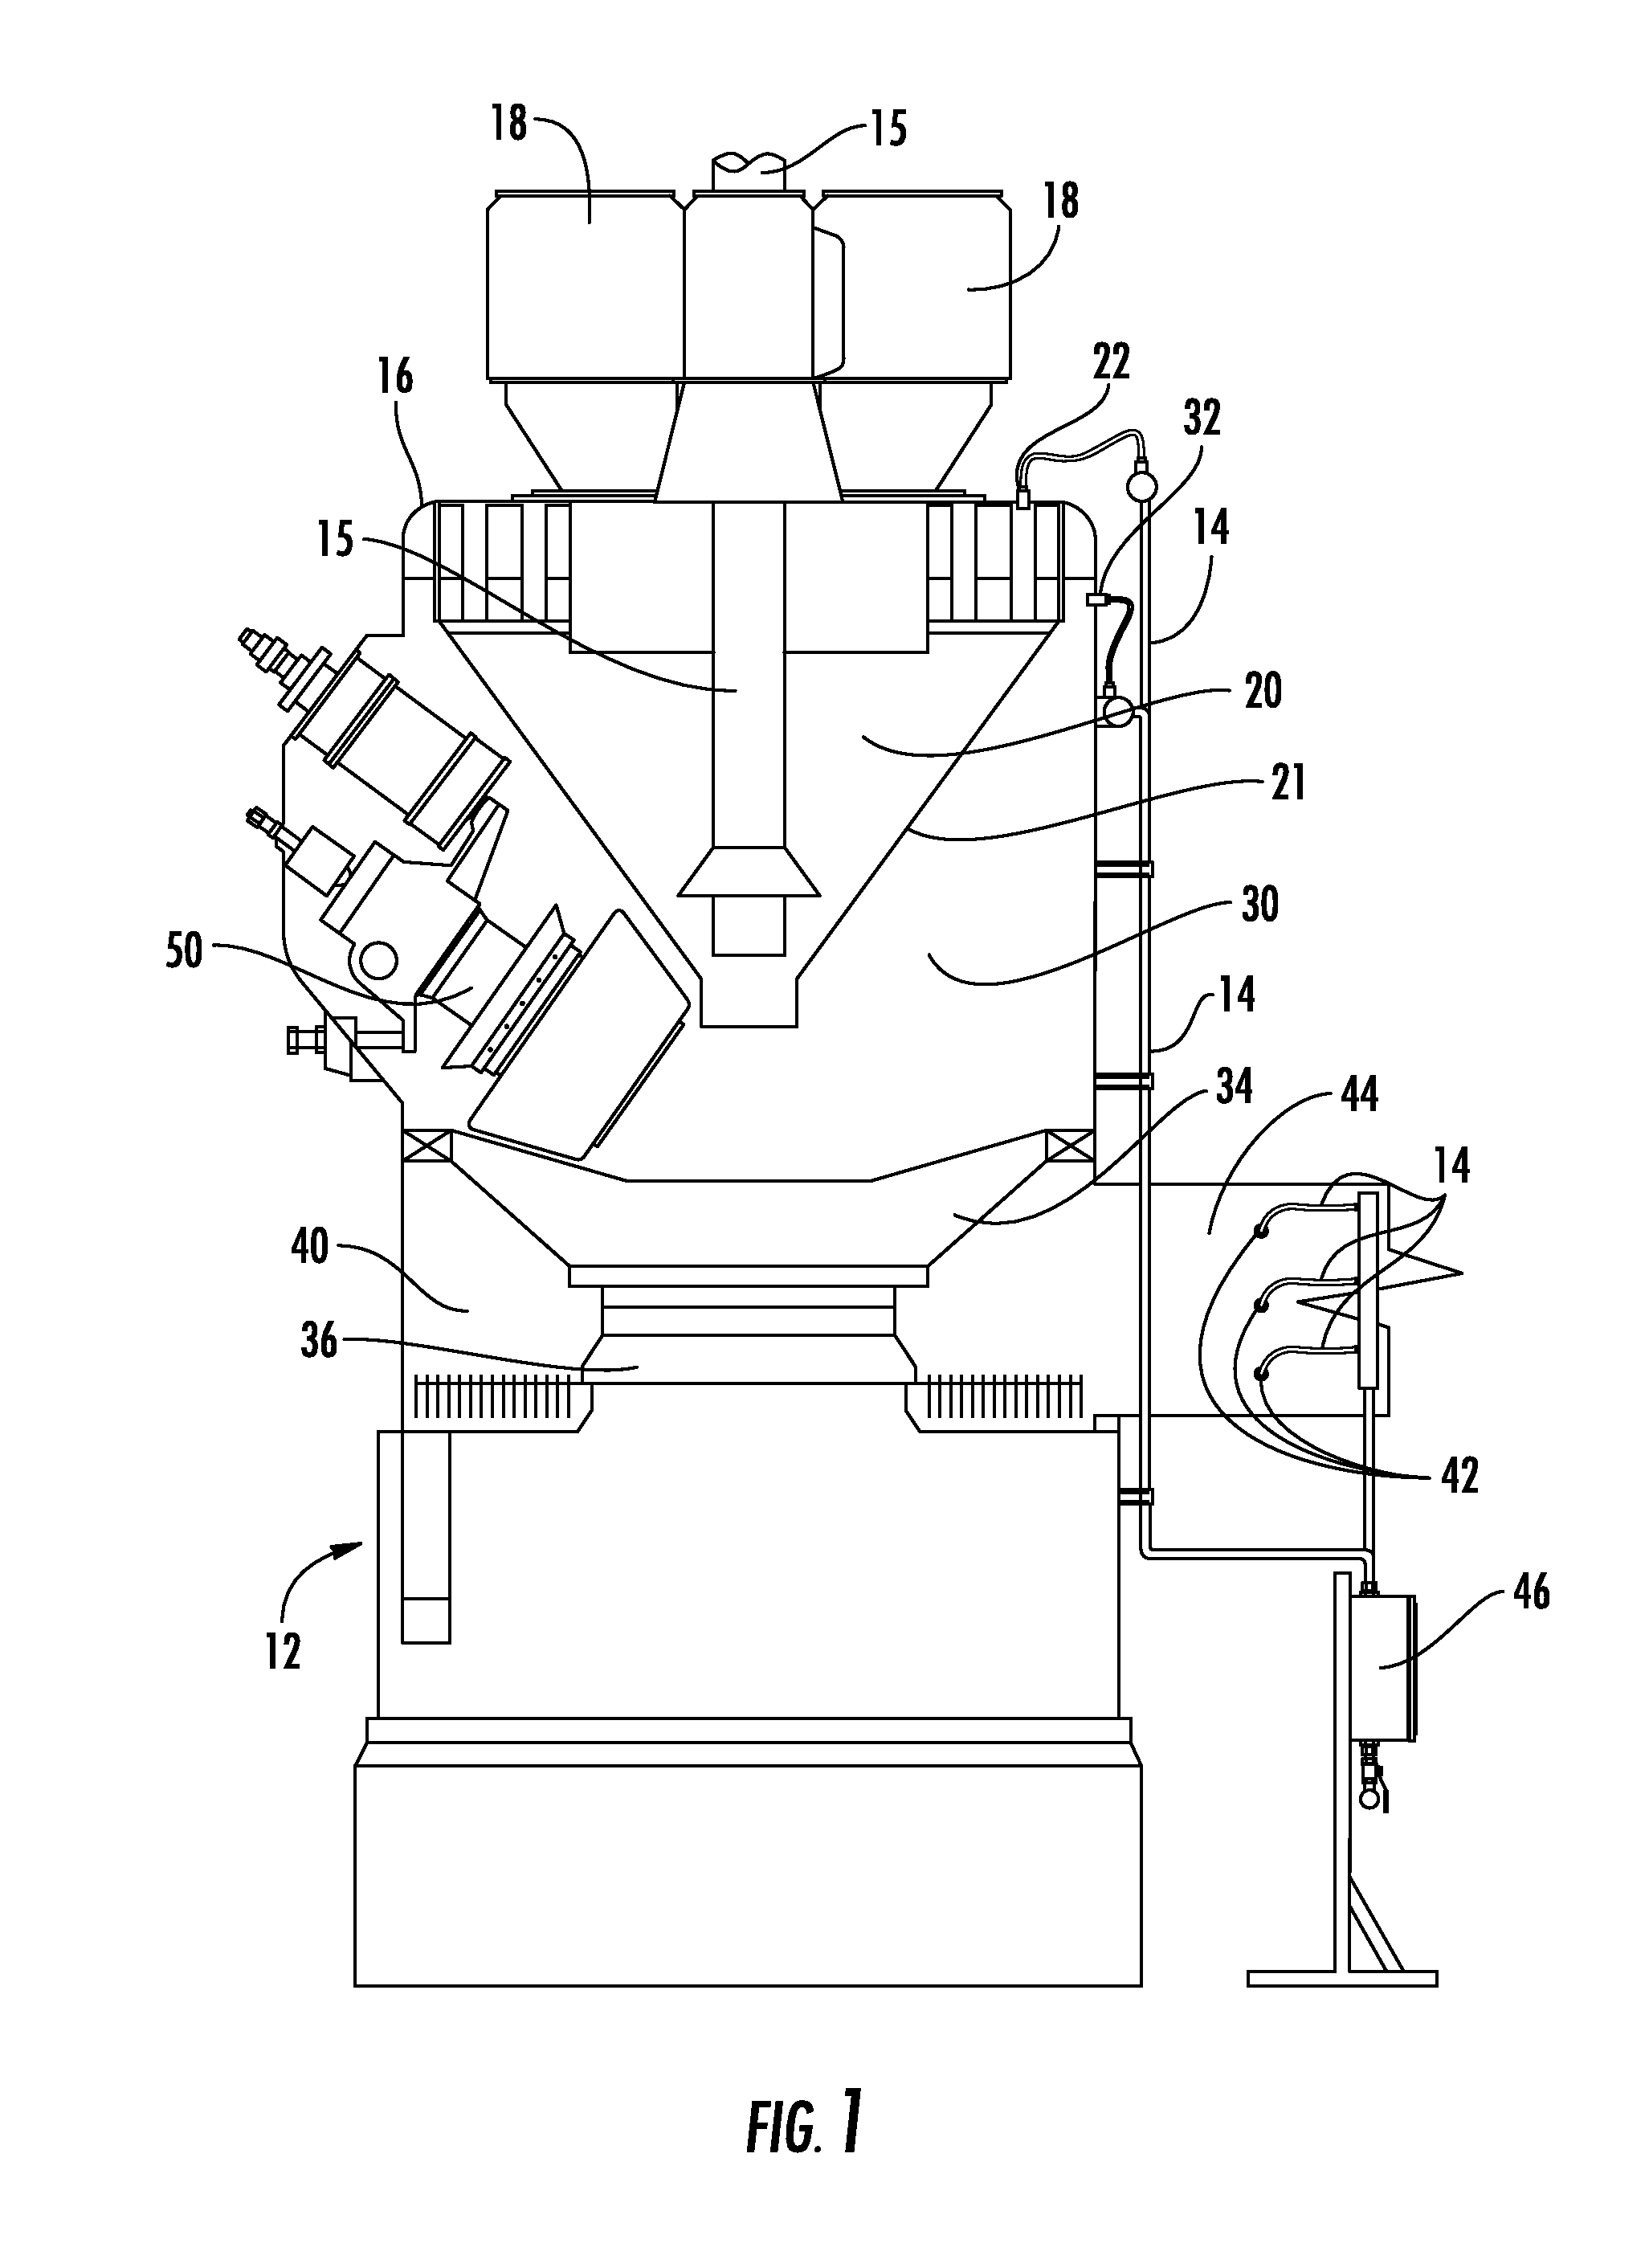 Pulverizer mill protection system